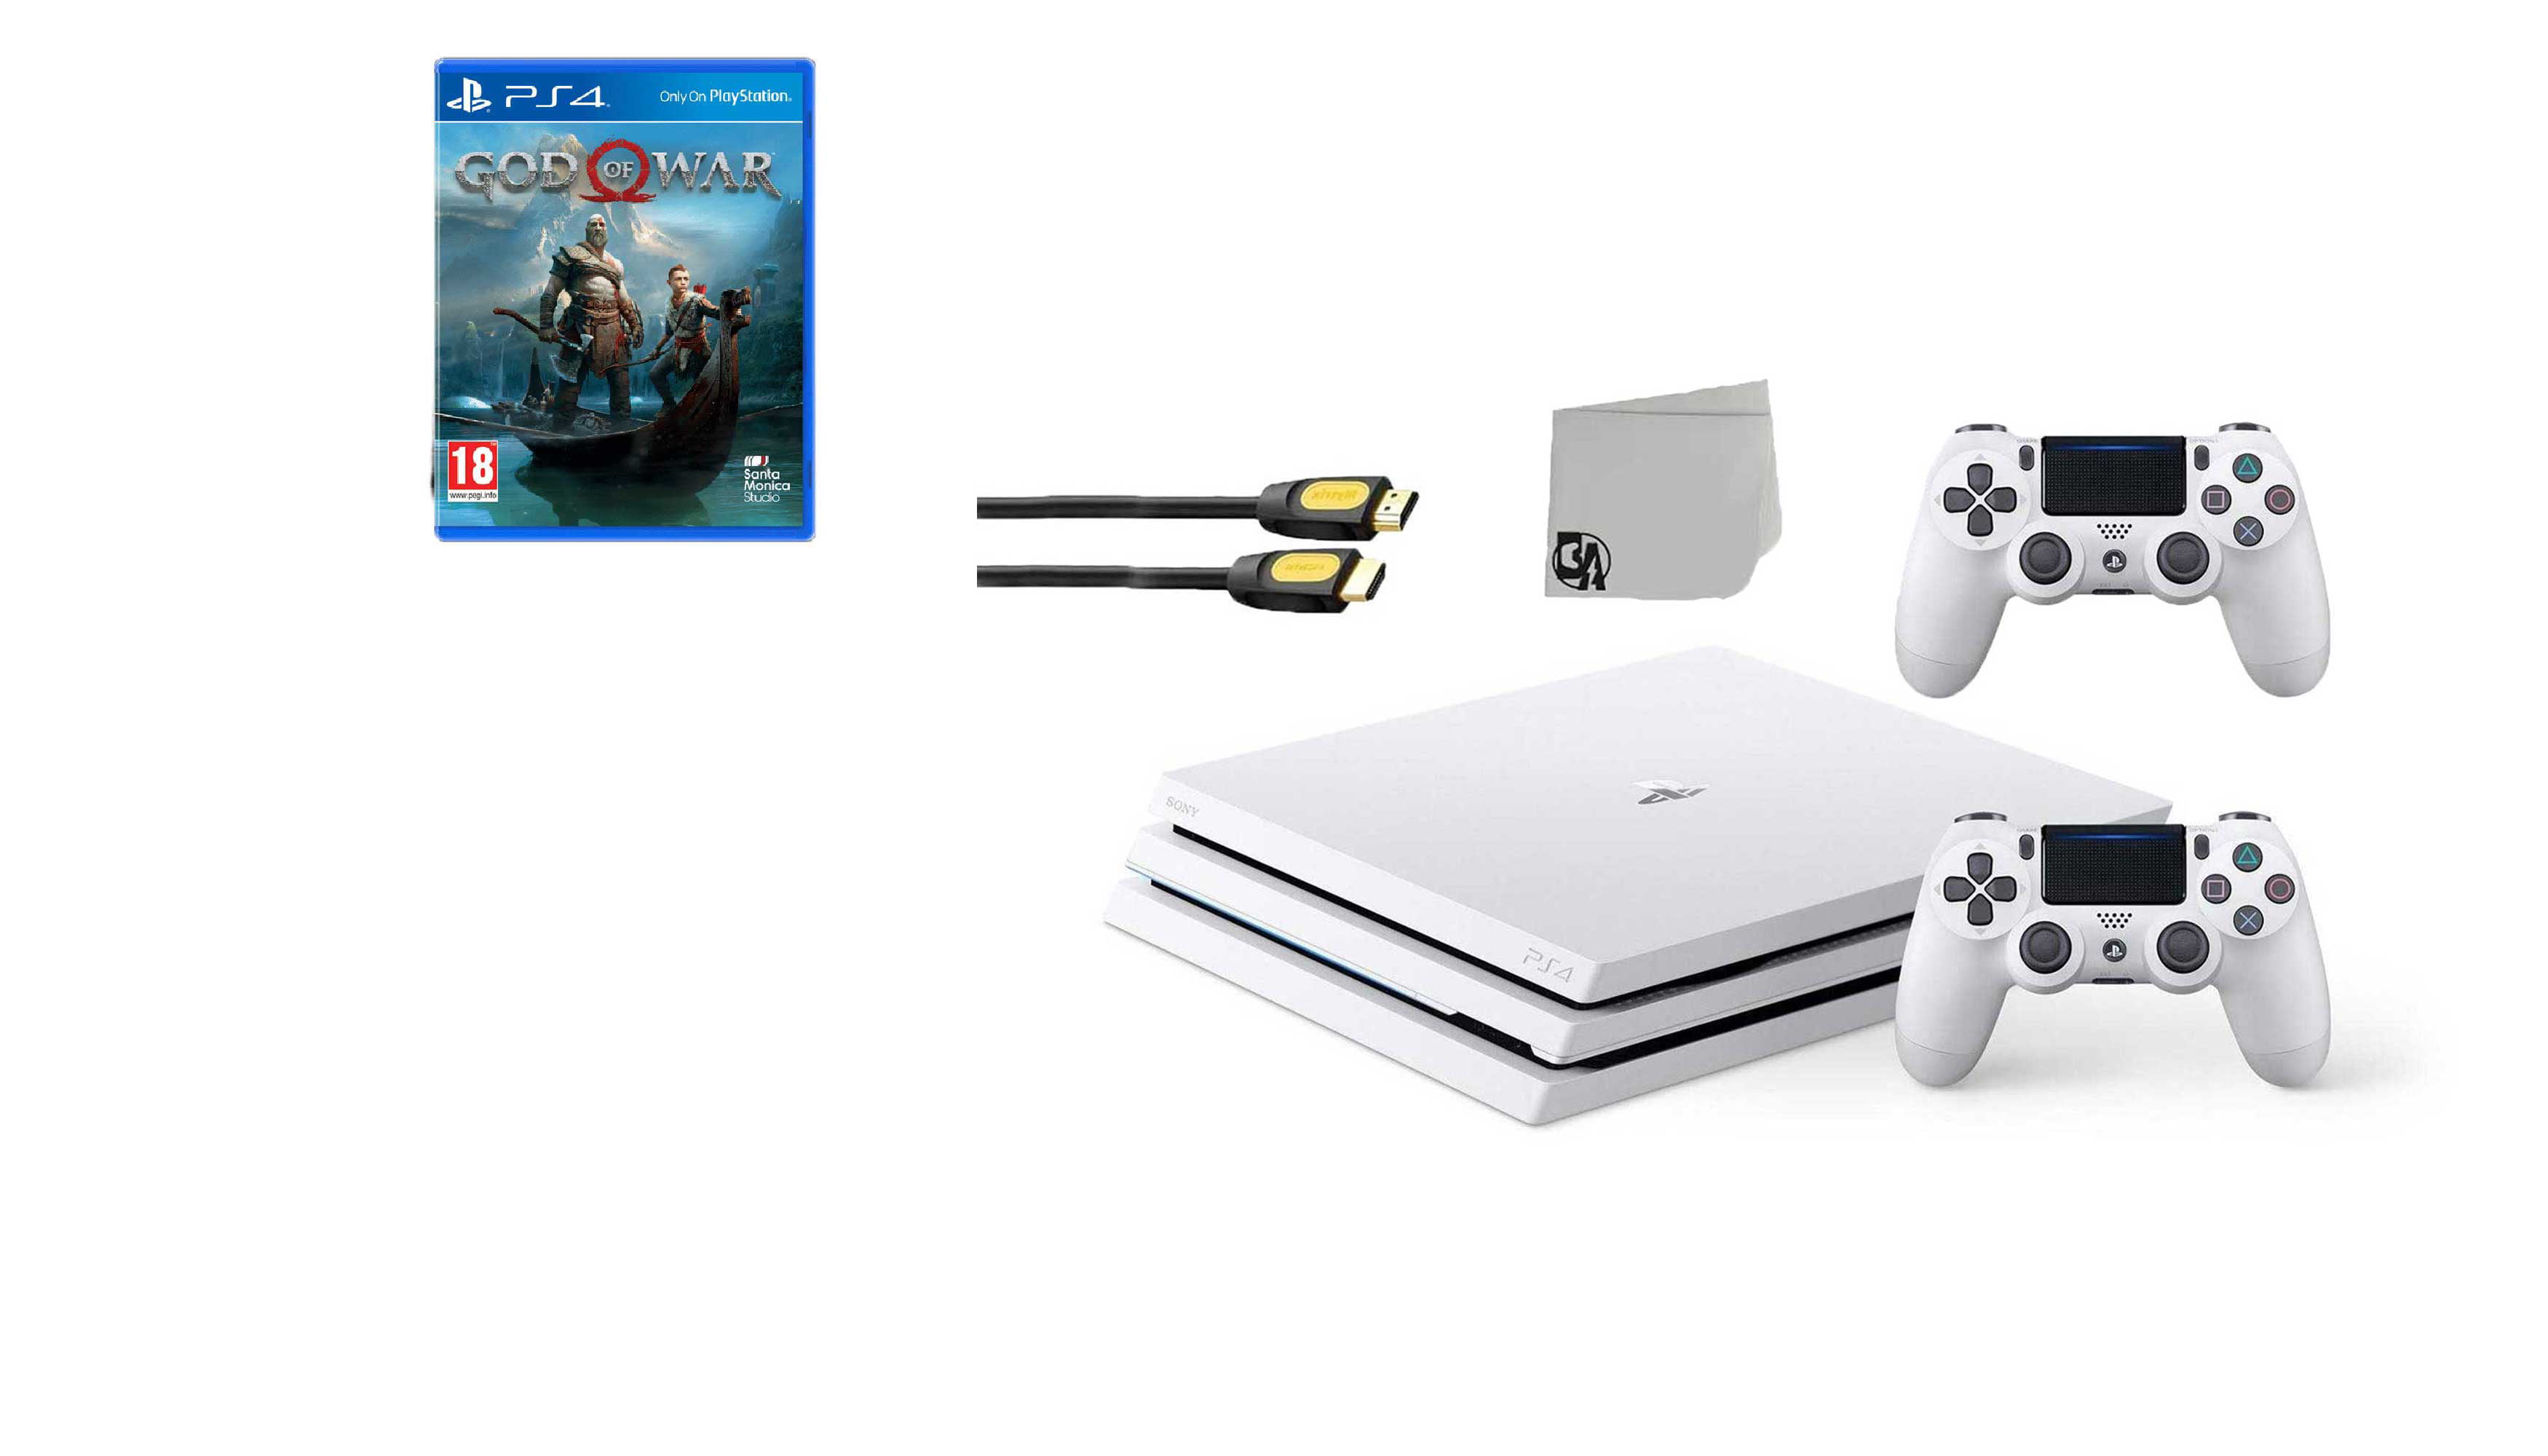 Sony PlayStation Pro Glacier 1TB Gaming Consol 2 Controller Included with Call of Duty Black Ops 4 BOLT AXTION Bundle New - Walmart.com